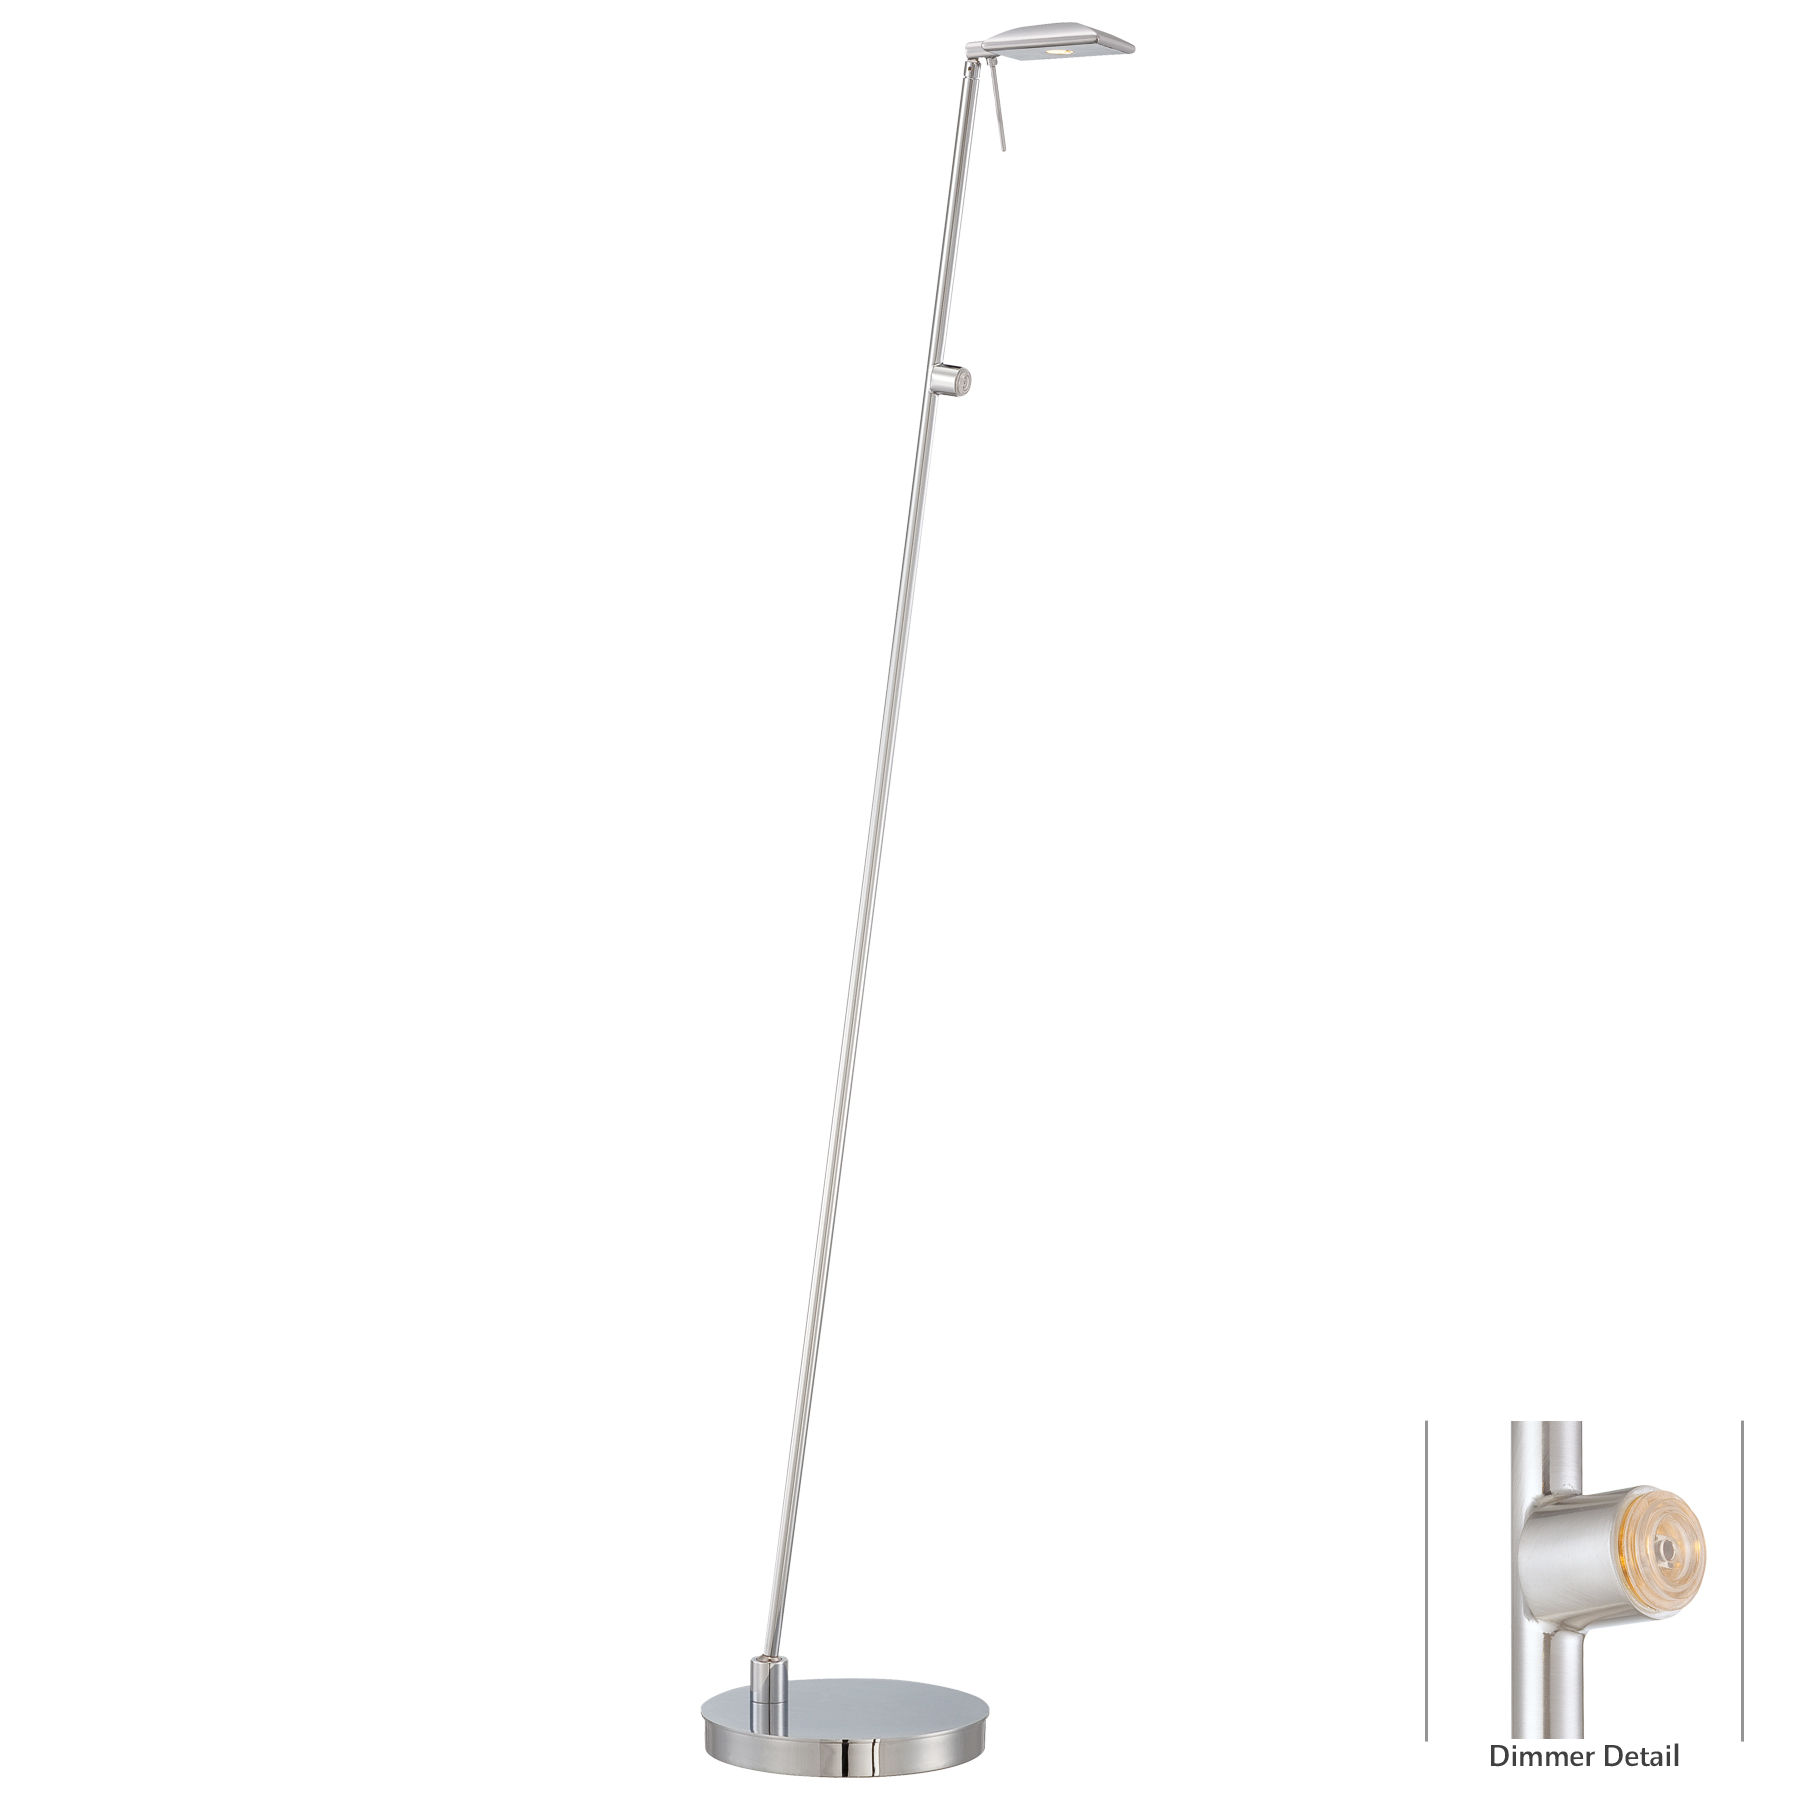 Georges Led Square Head Reading Room Pharmacy Floor Lamp George Kovacs P4324 077 pertaining to size 1800 X 1800